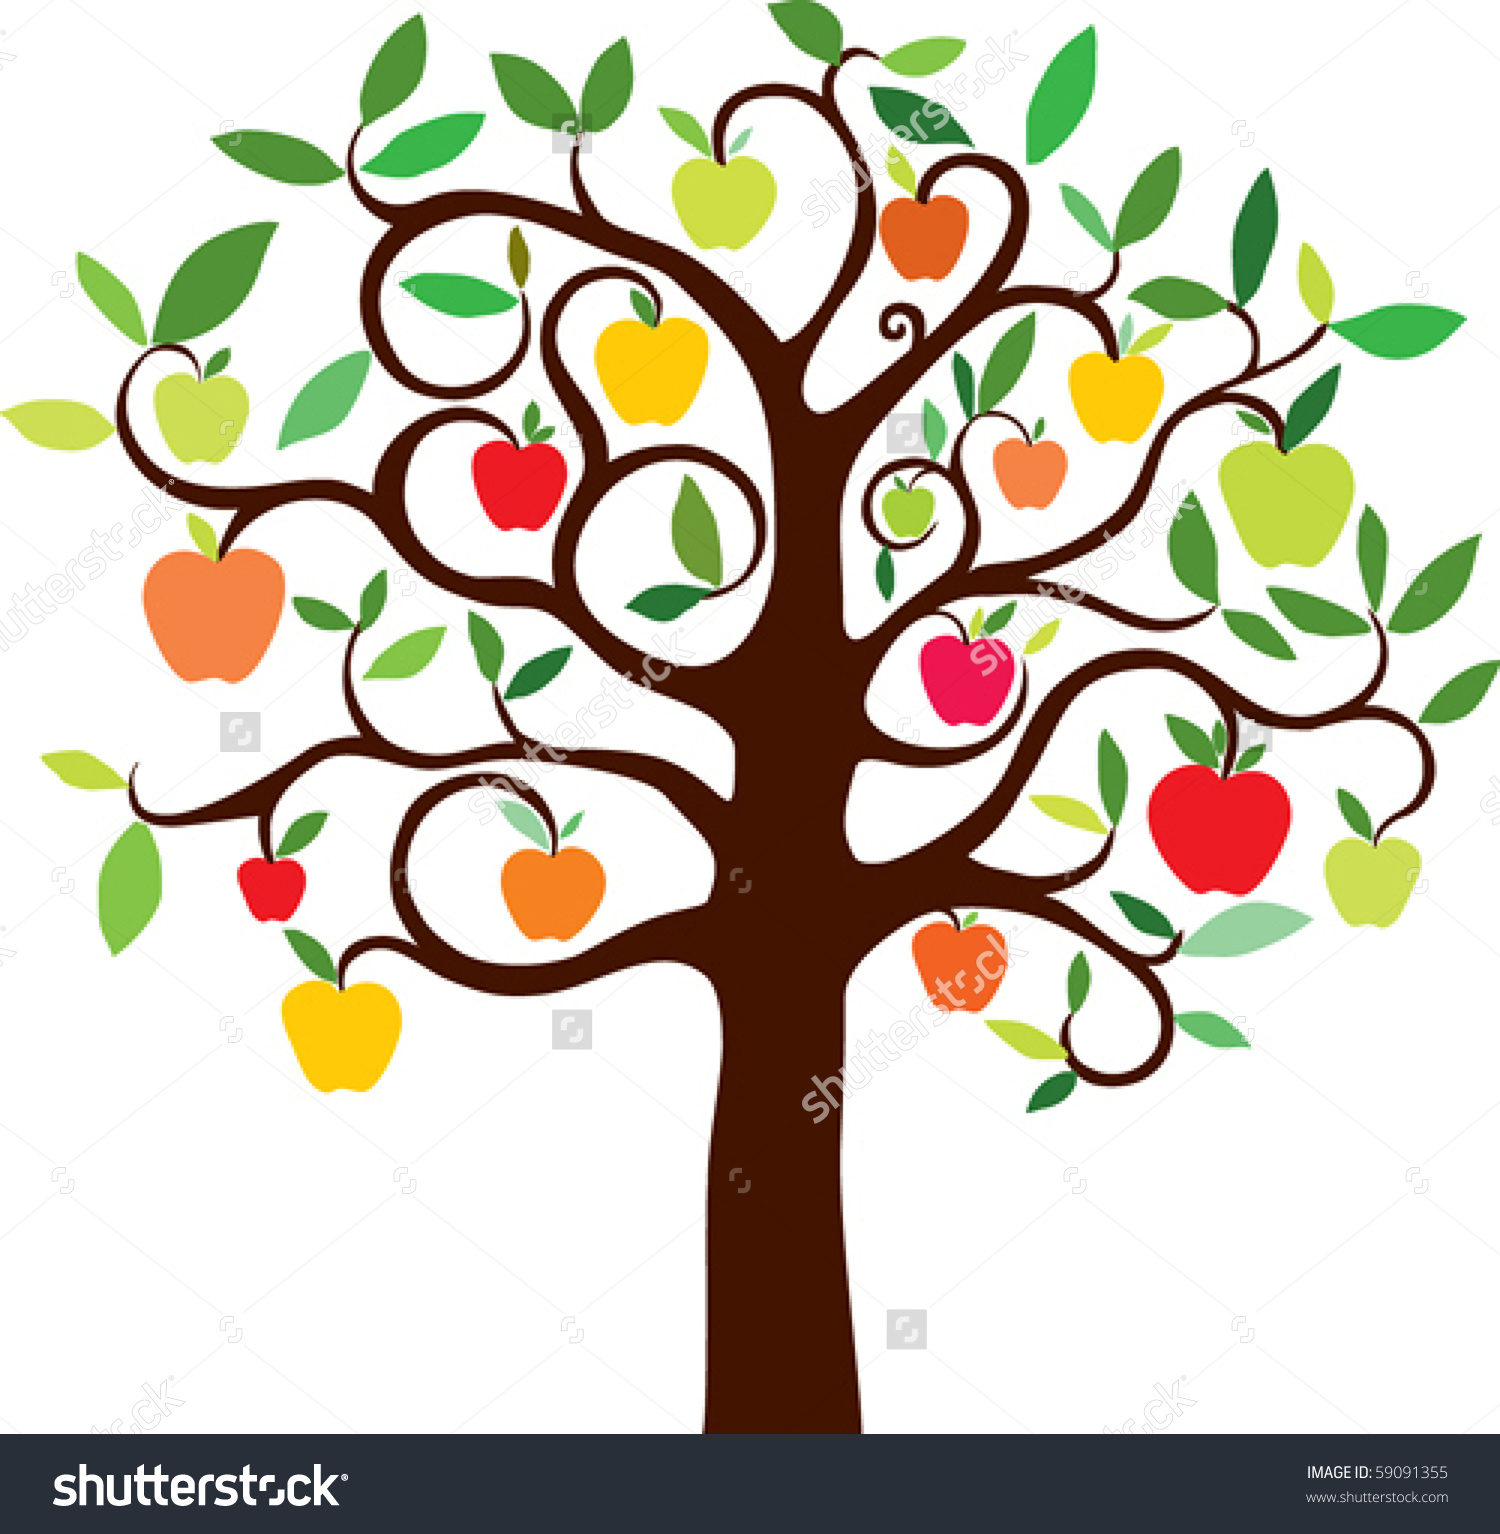 free clipart of fruit trees - photo #40